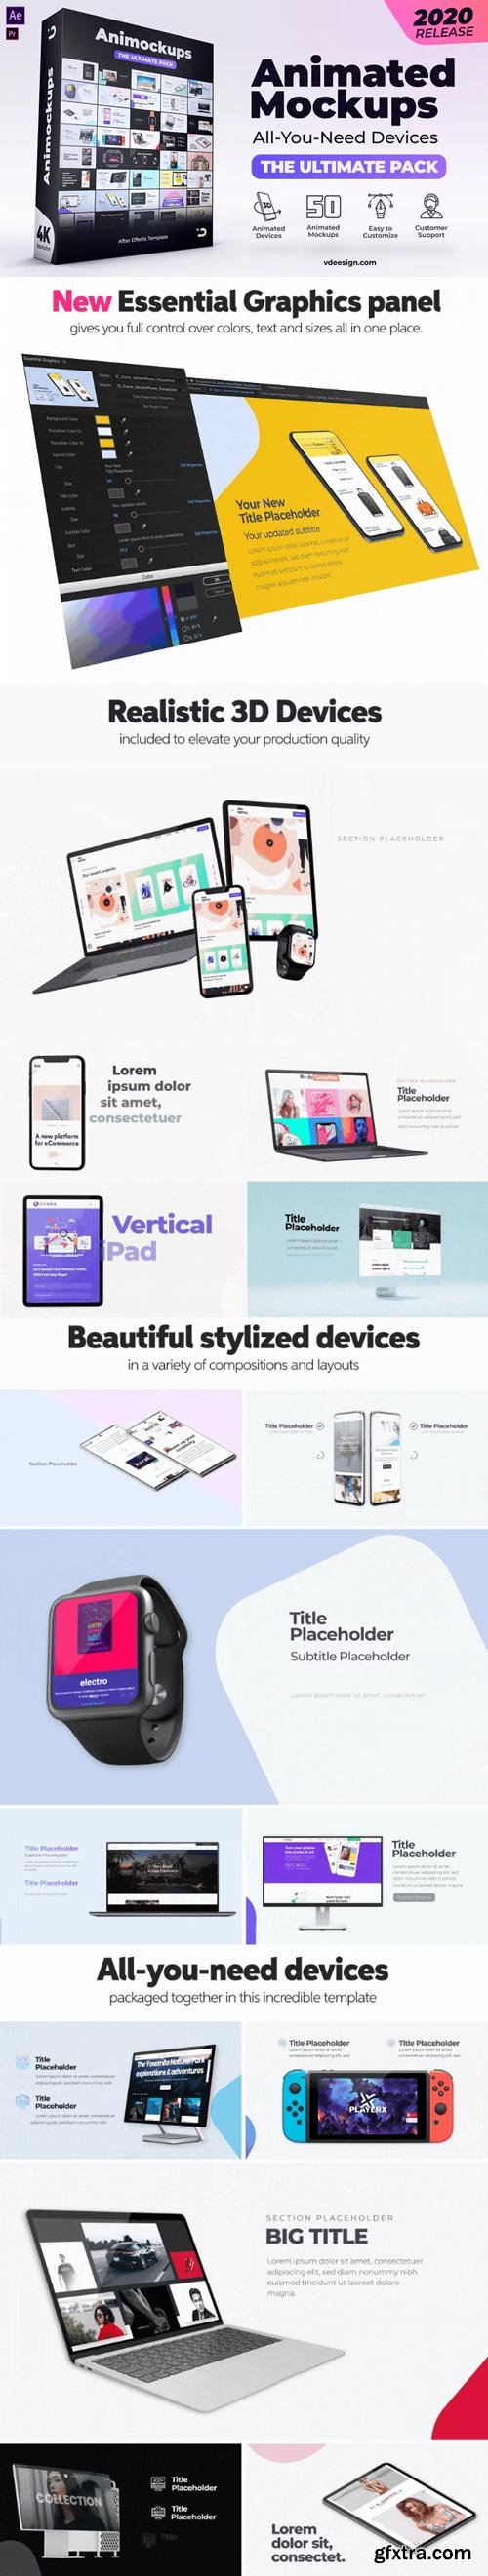 Videohive - Animated Mockups Ultimate Pack - 26371337